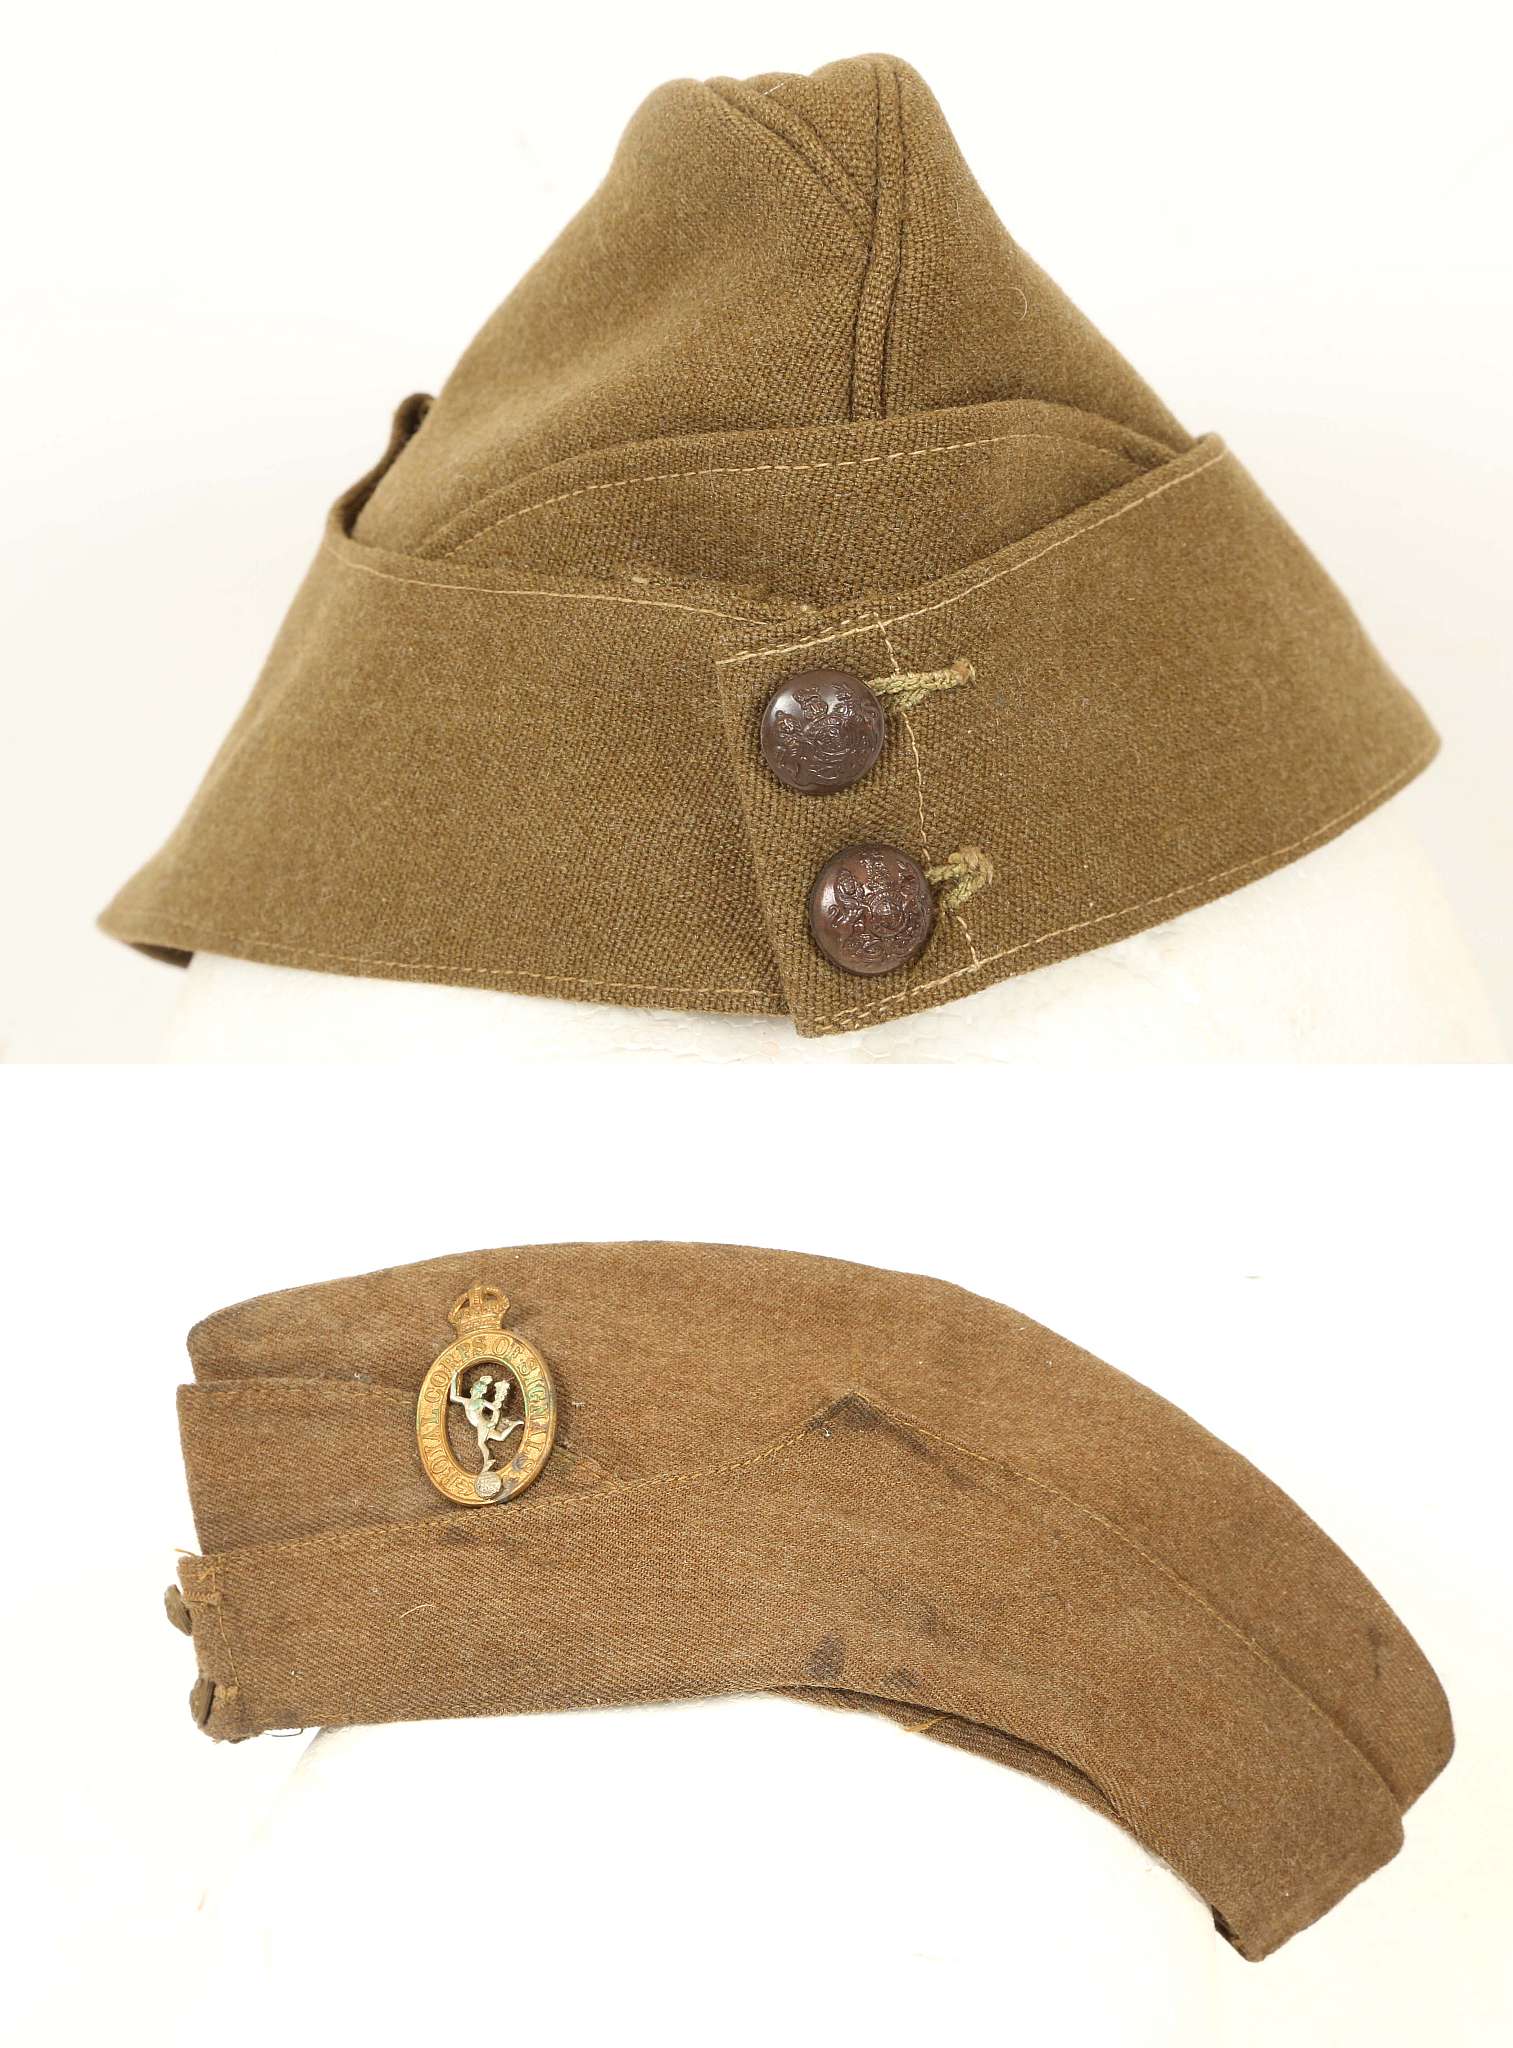 British Army WWII side caps; Officer's private pur